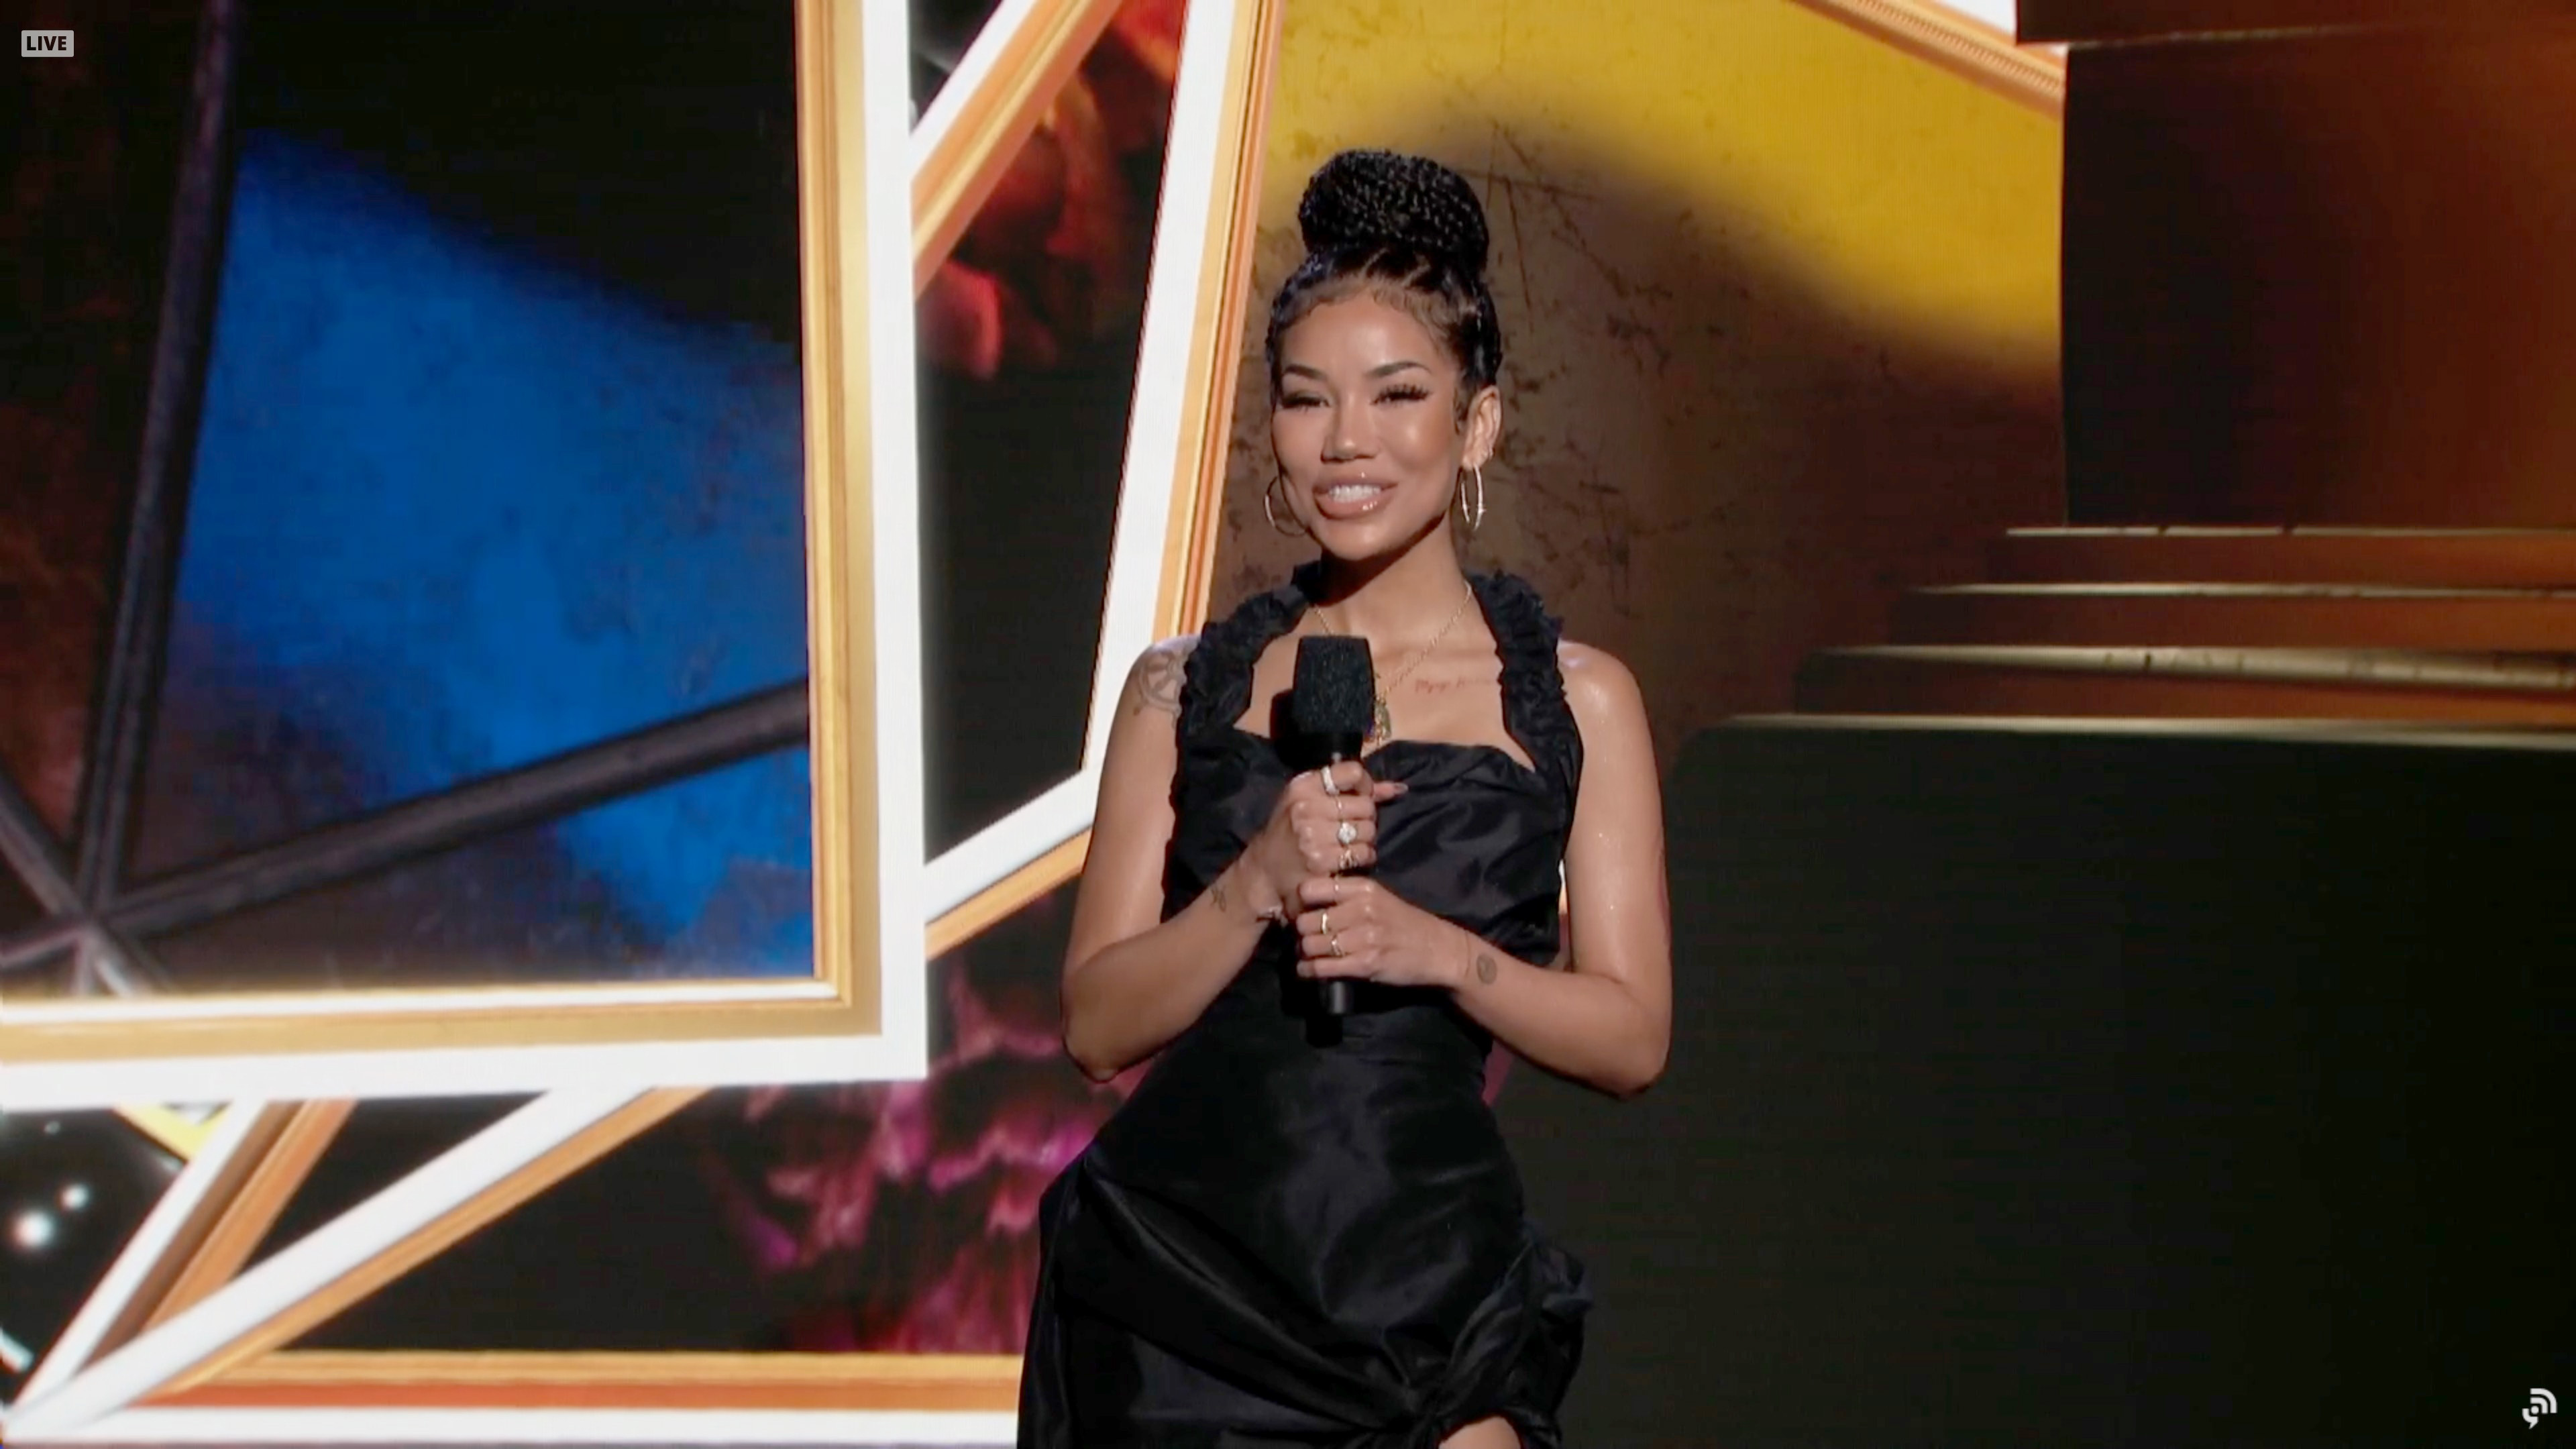 Watch Jhené Aiko perform America the Beautiful at Super Bowl 2022